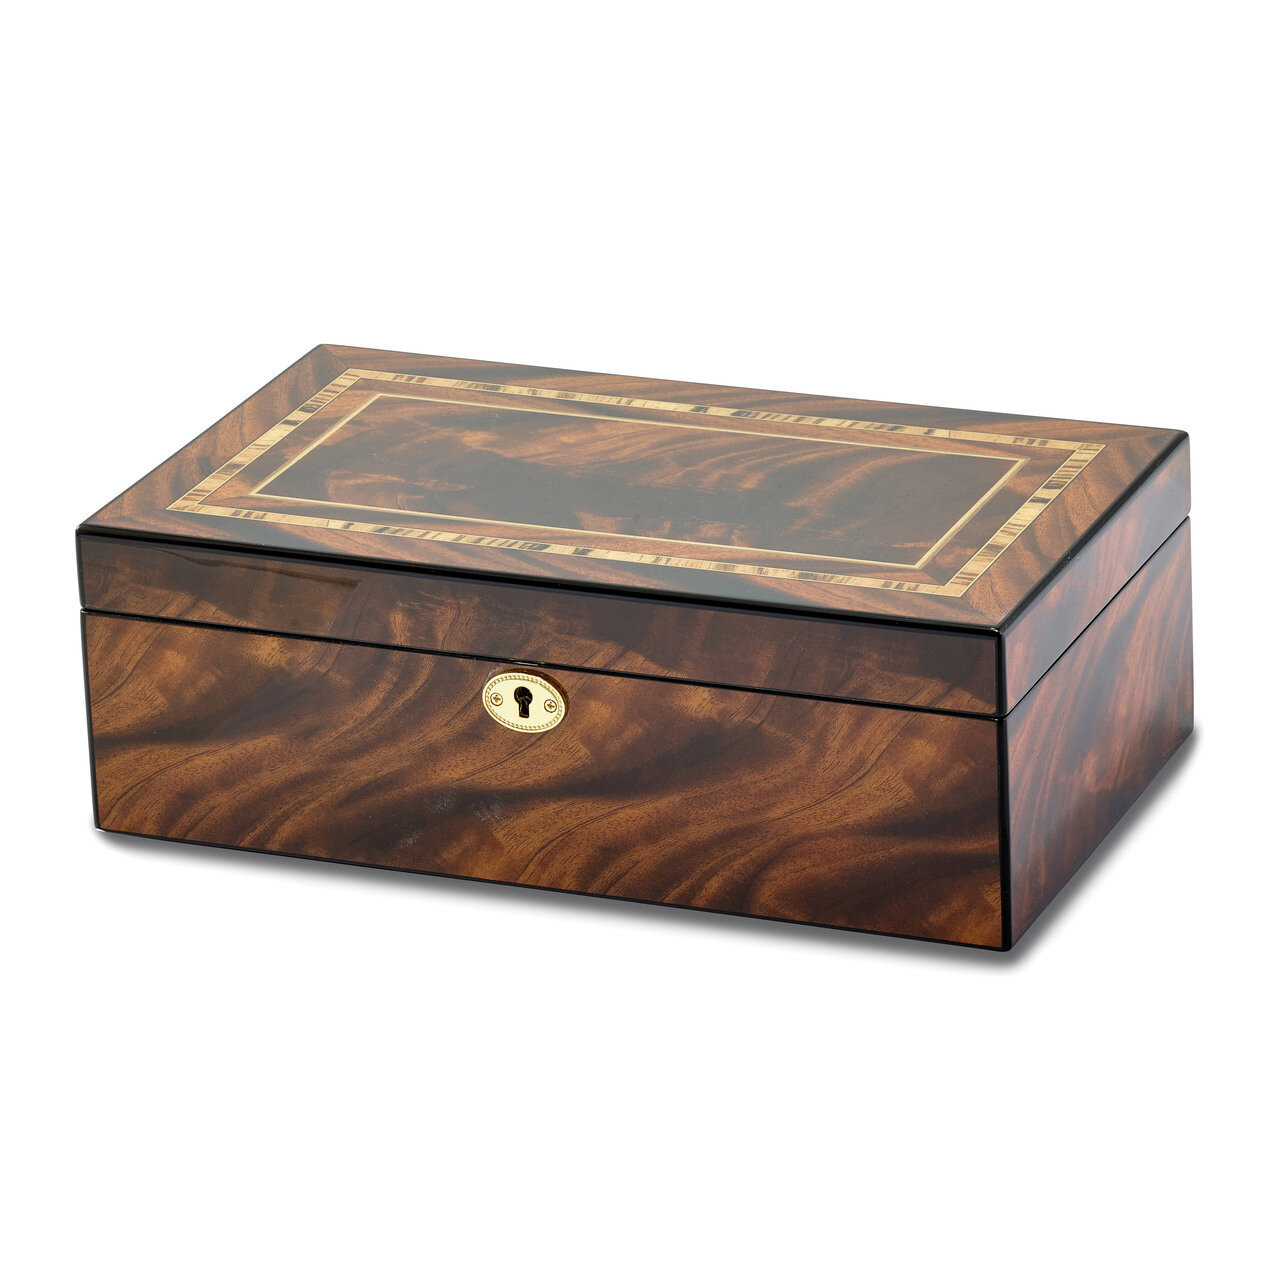 Tiger Wood Veneer High Gloss Finish Multi Use Locking Collector Box by Jere